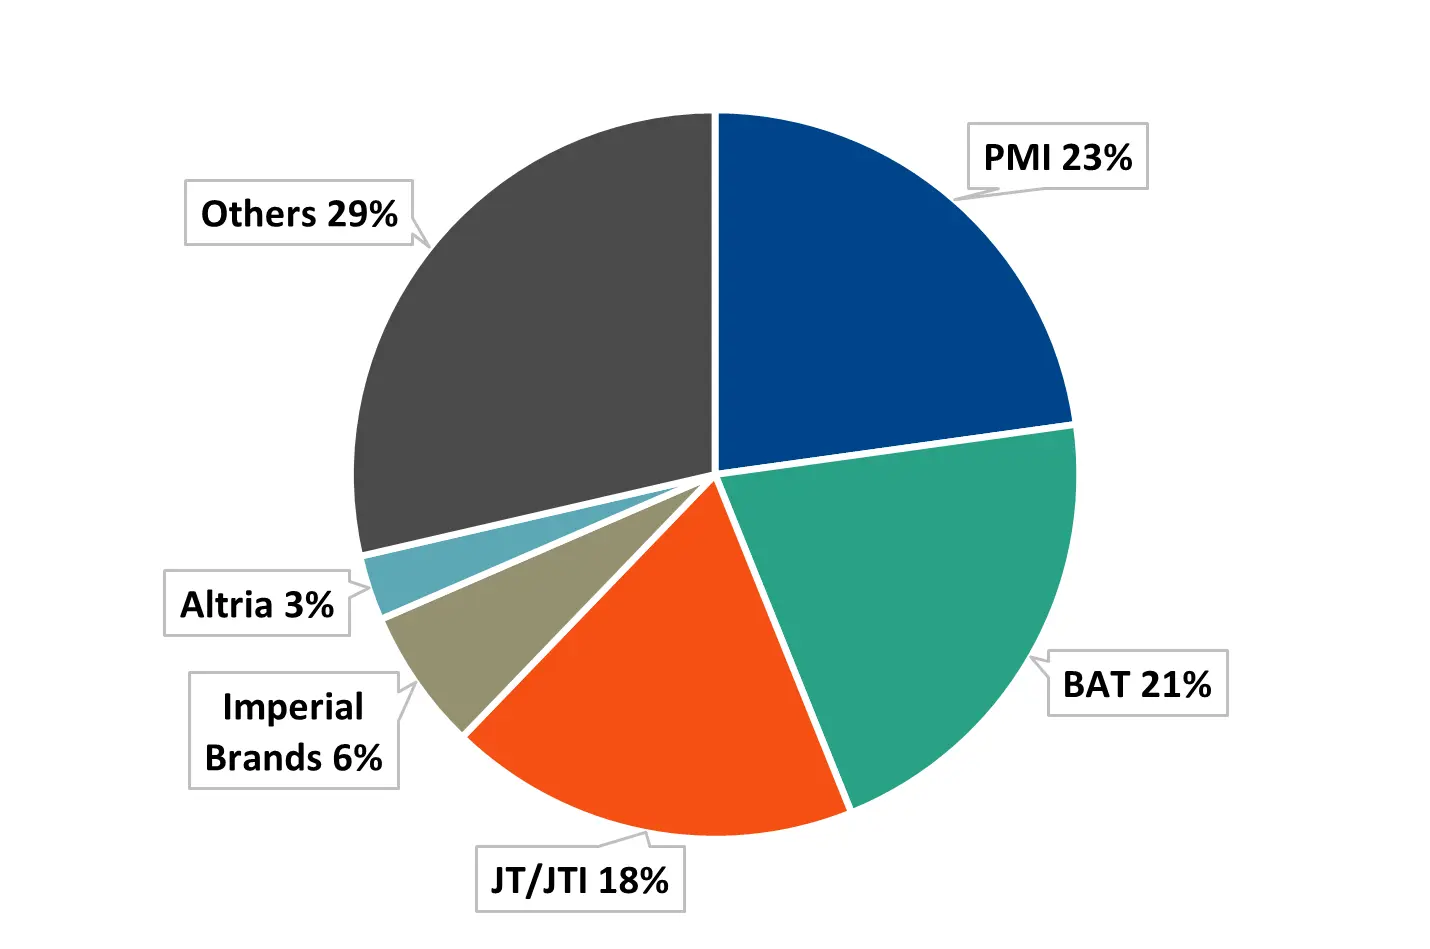 A pie chart showing the share of cigarette sales by PMI, BAT, JT/JTI, Imperial Brands, Altria and others